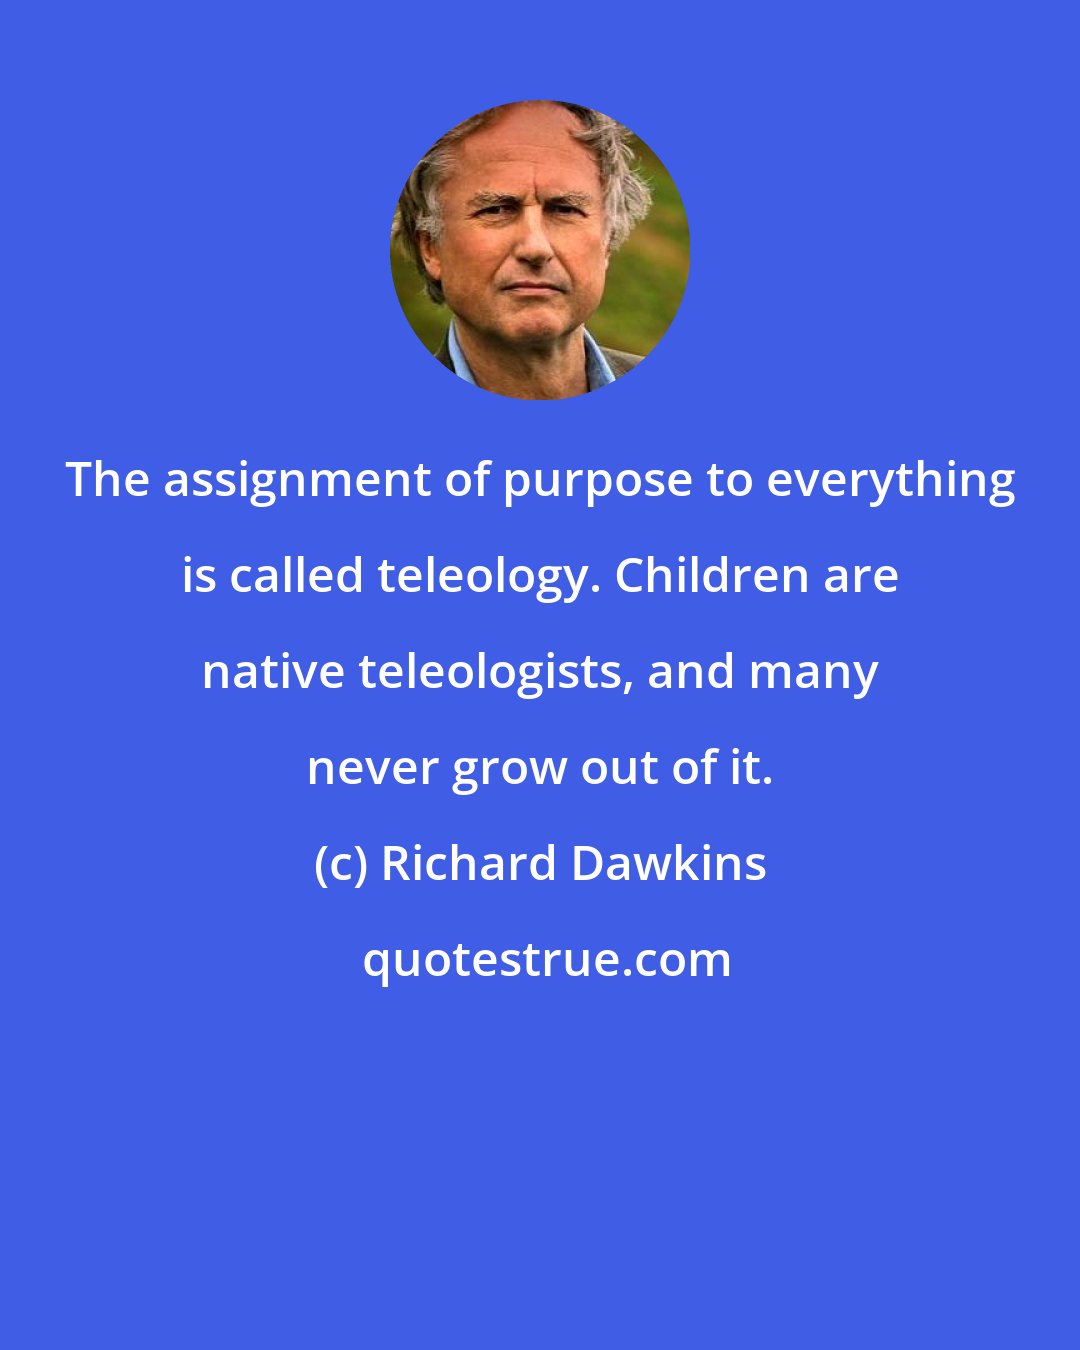 Richard Dawkins: The assignment of purpose to everything is called teleology. Children are native teleologists, and many never grow out of it.